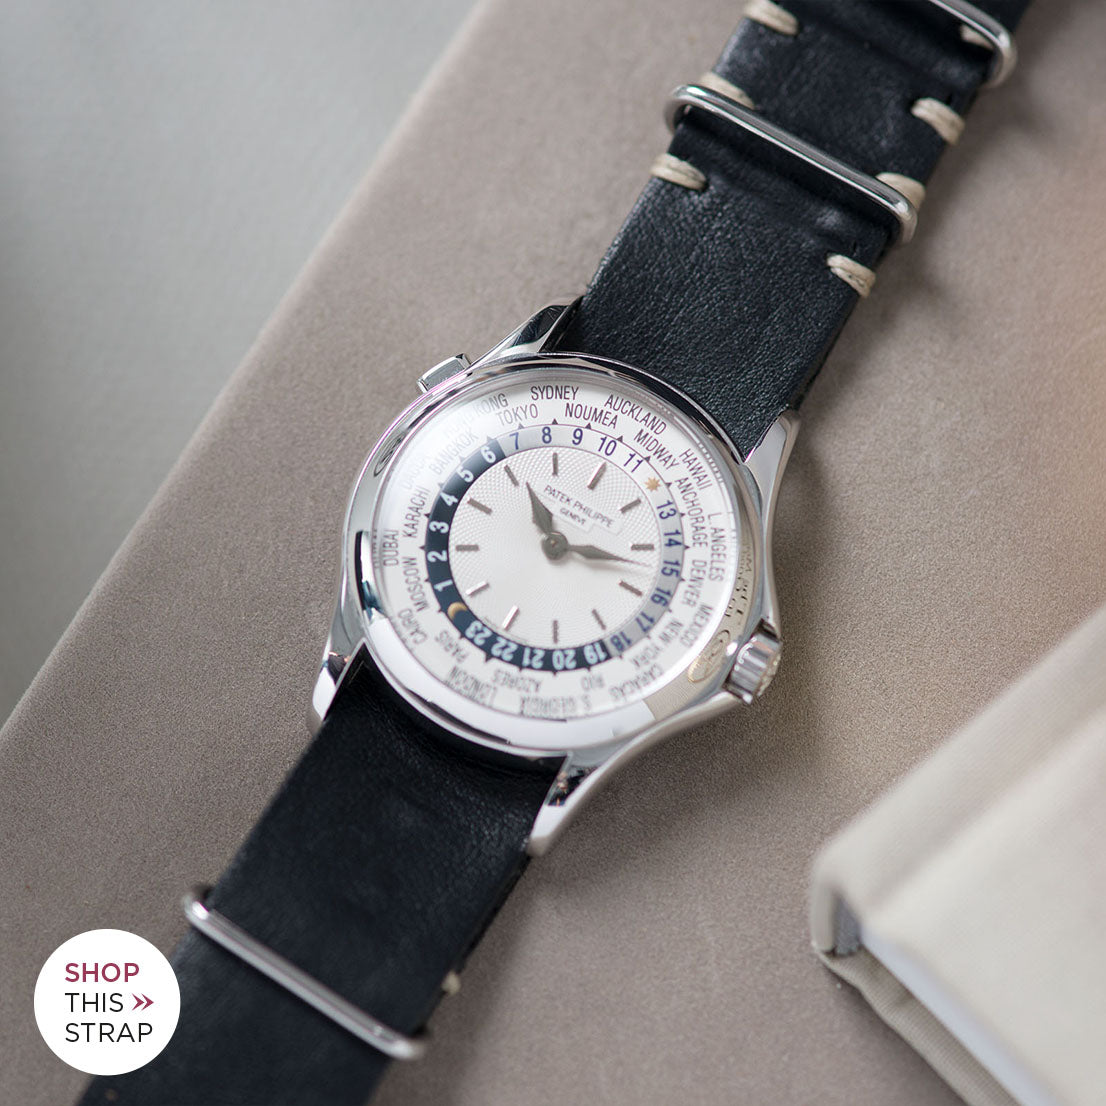 Bulang and Sons_Strap Guide _Patek Philippe 5110G White Gold World Time_Black Nato Leather Watch Strap